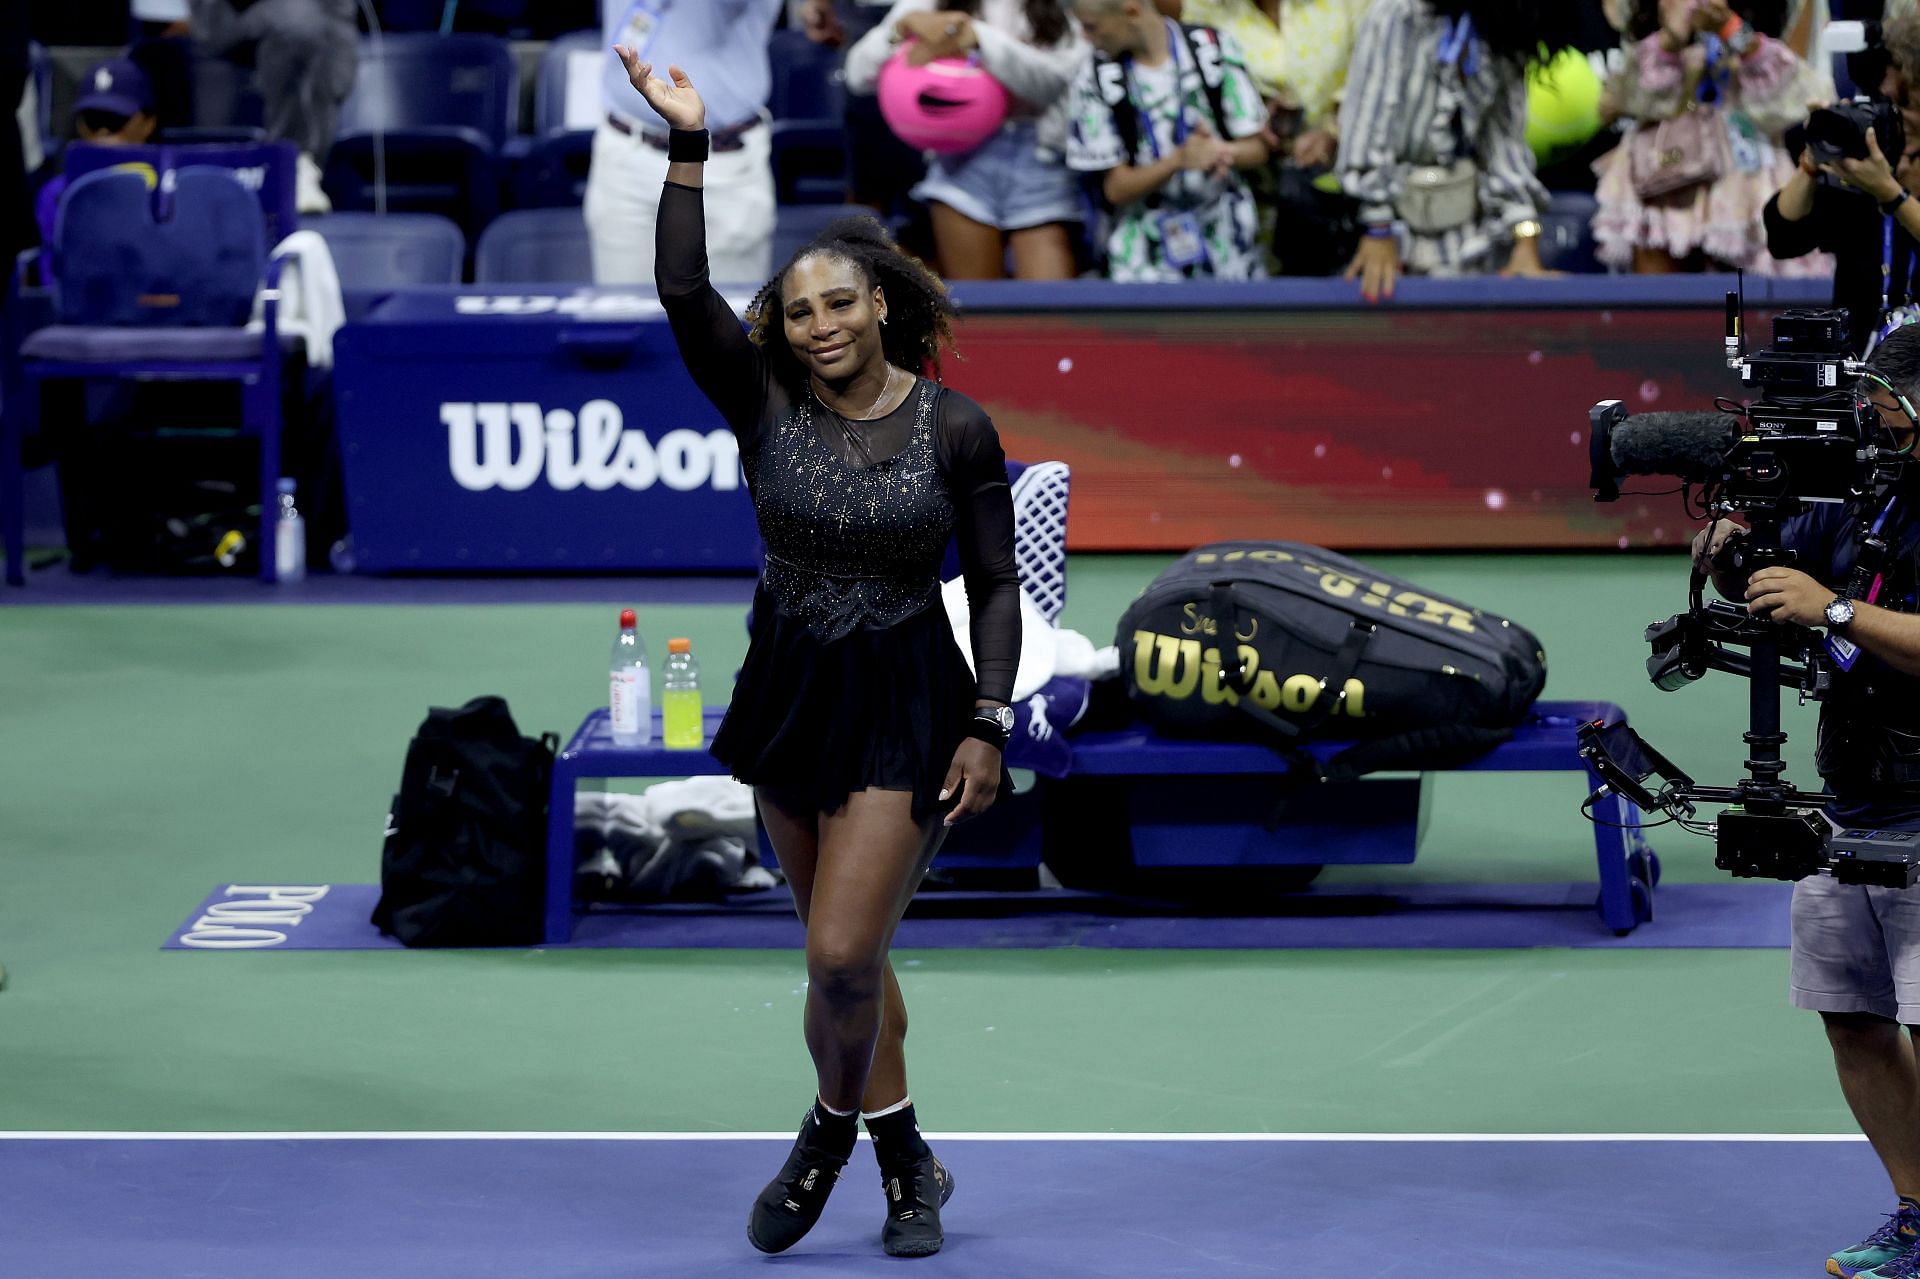 Serena Williams after her match against Ajla Tomljanovic at the 2022 US Open